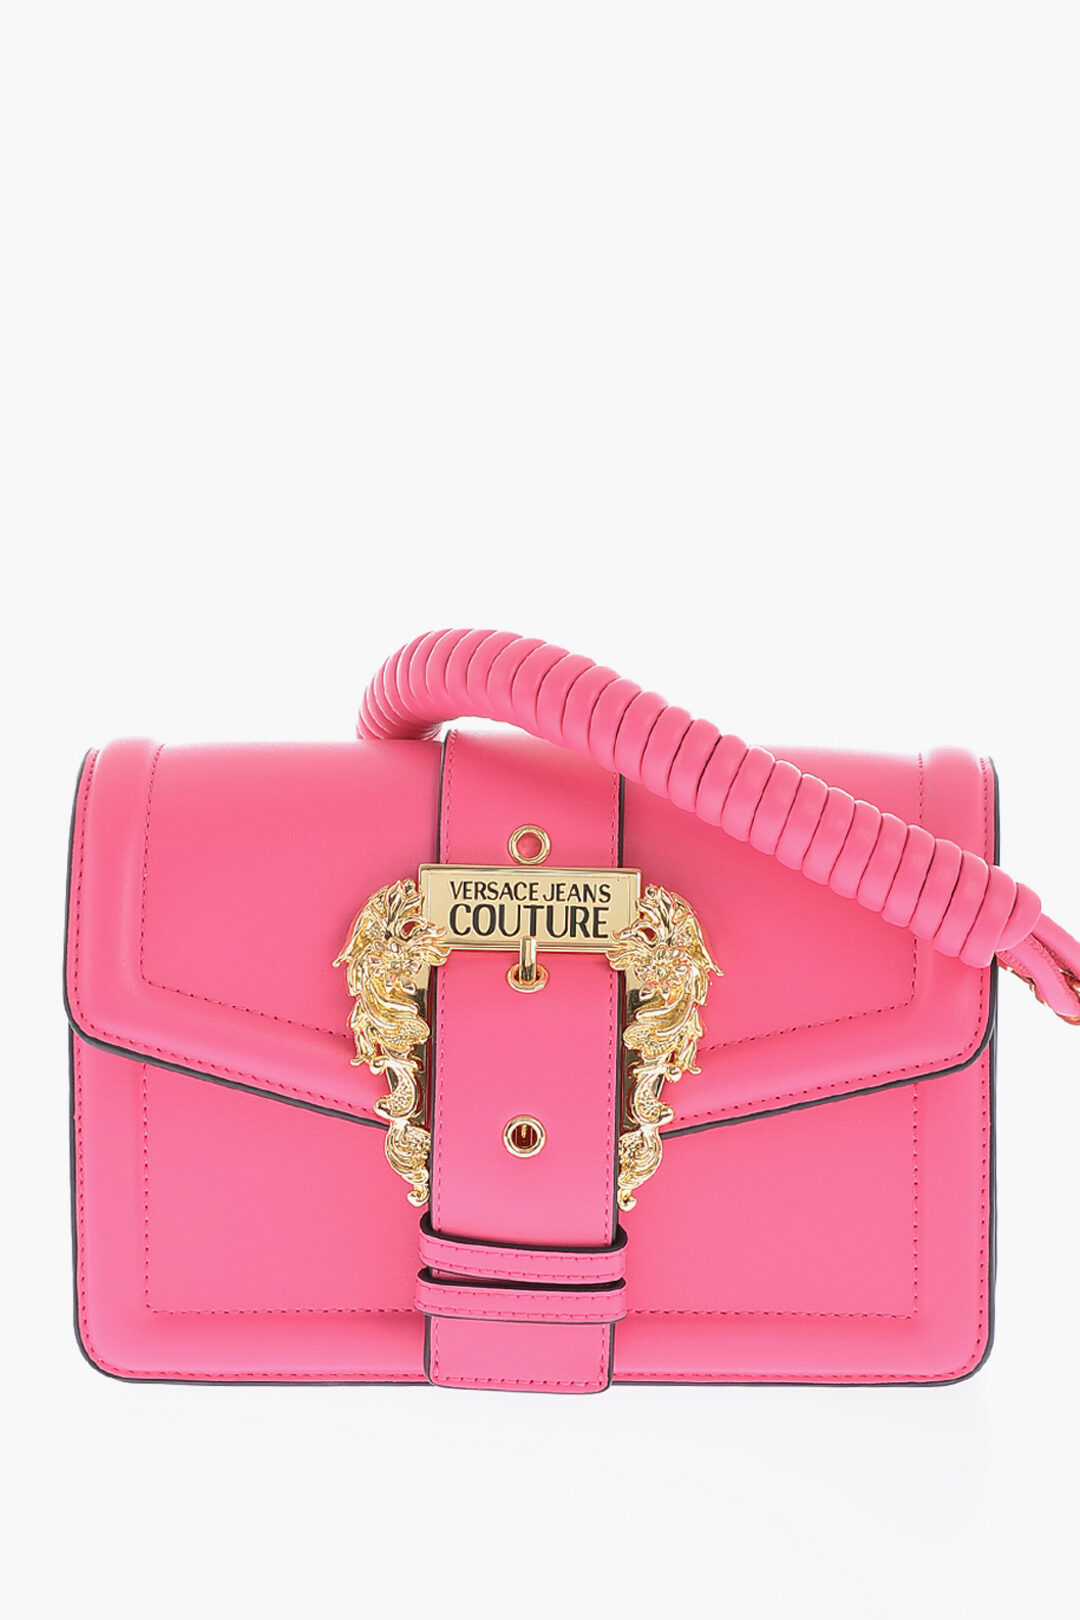 VERSACE JEANS COUTURE Two Way Shoulder Bag,Fuchsia,Original Price $395!  (NWT) | eBay